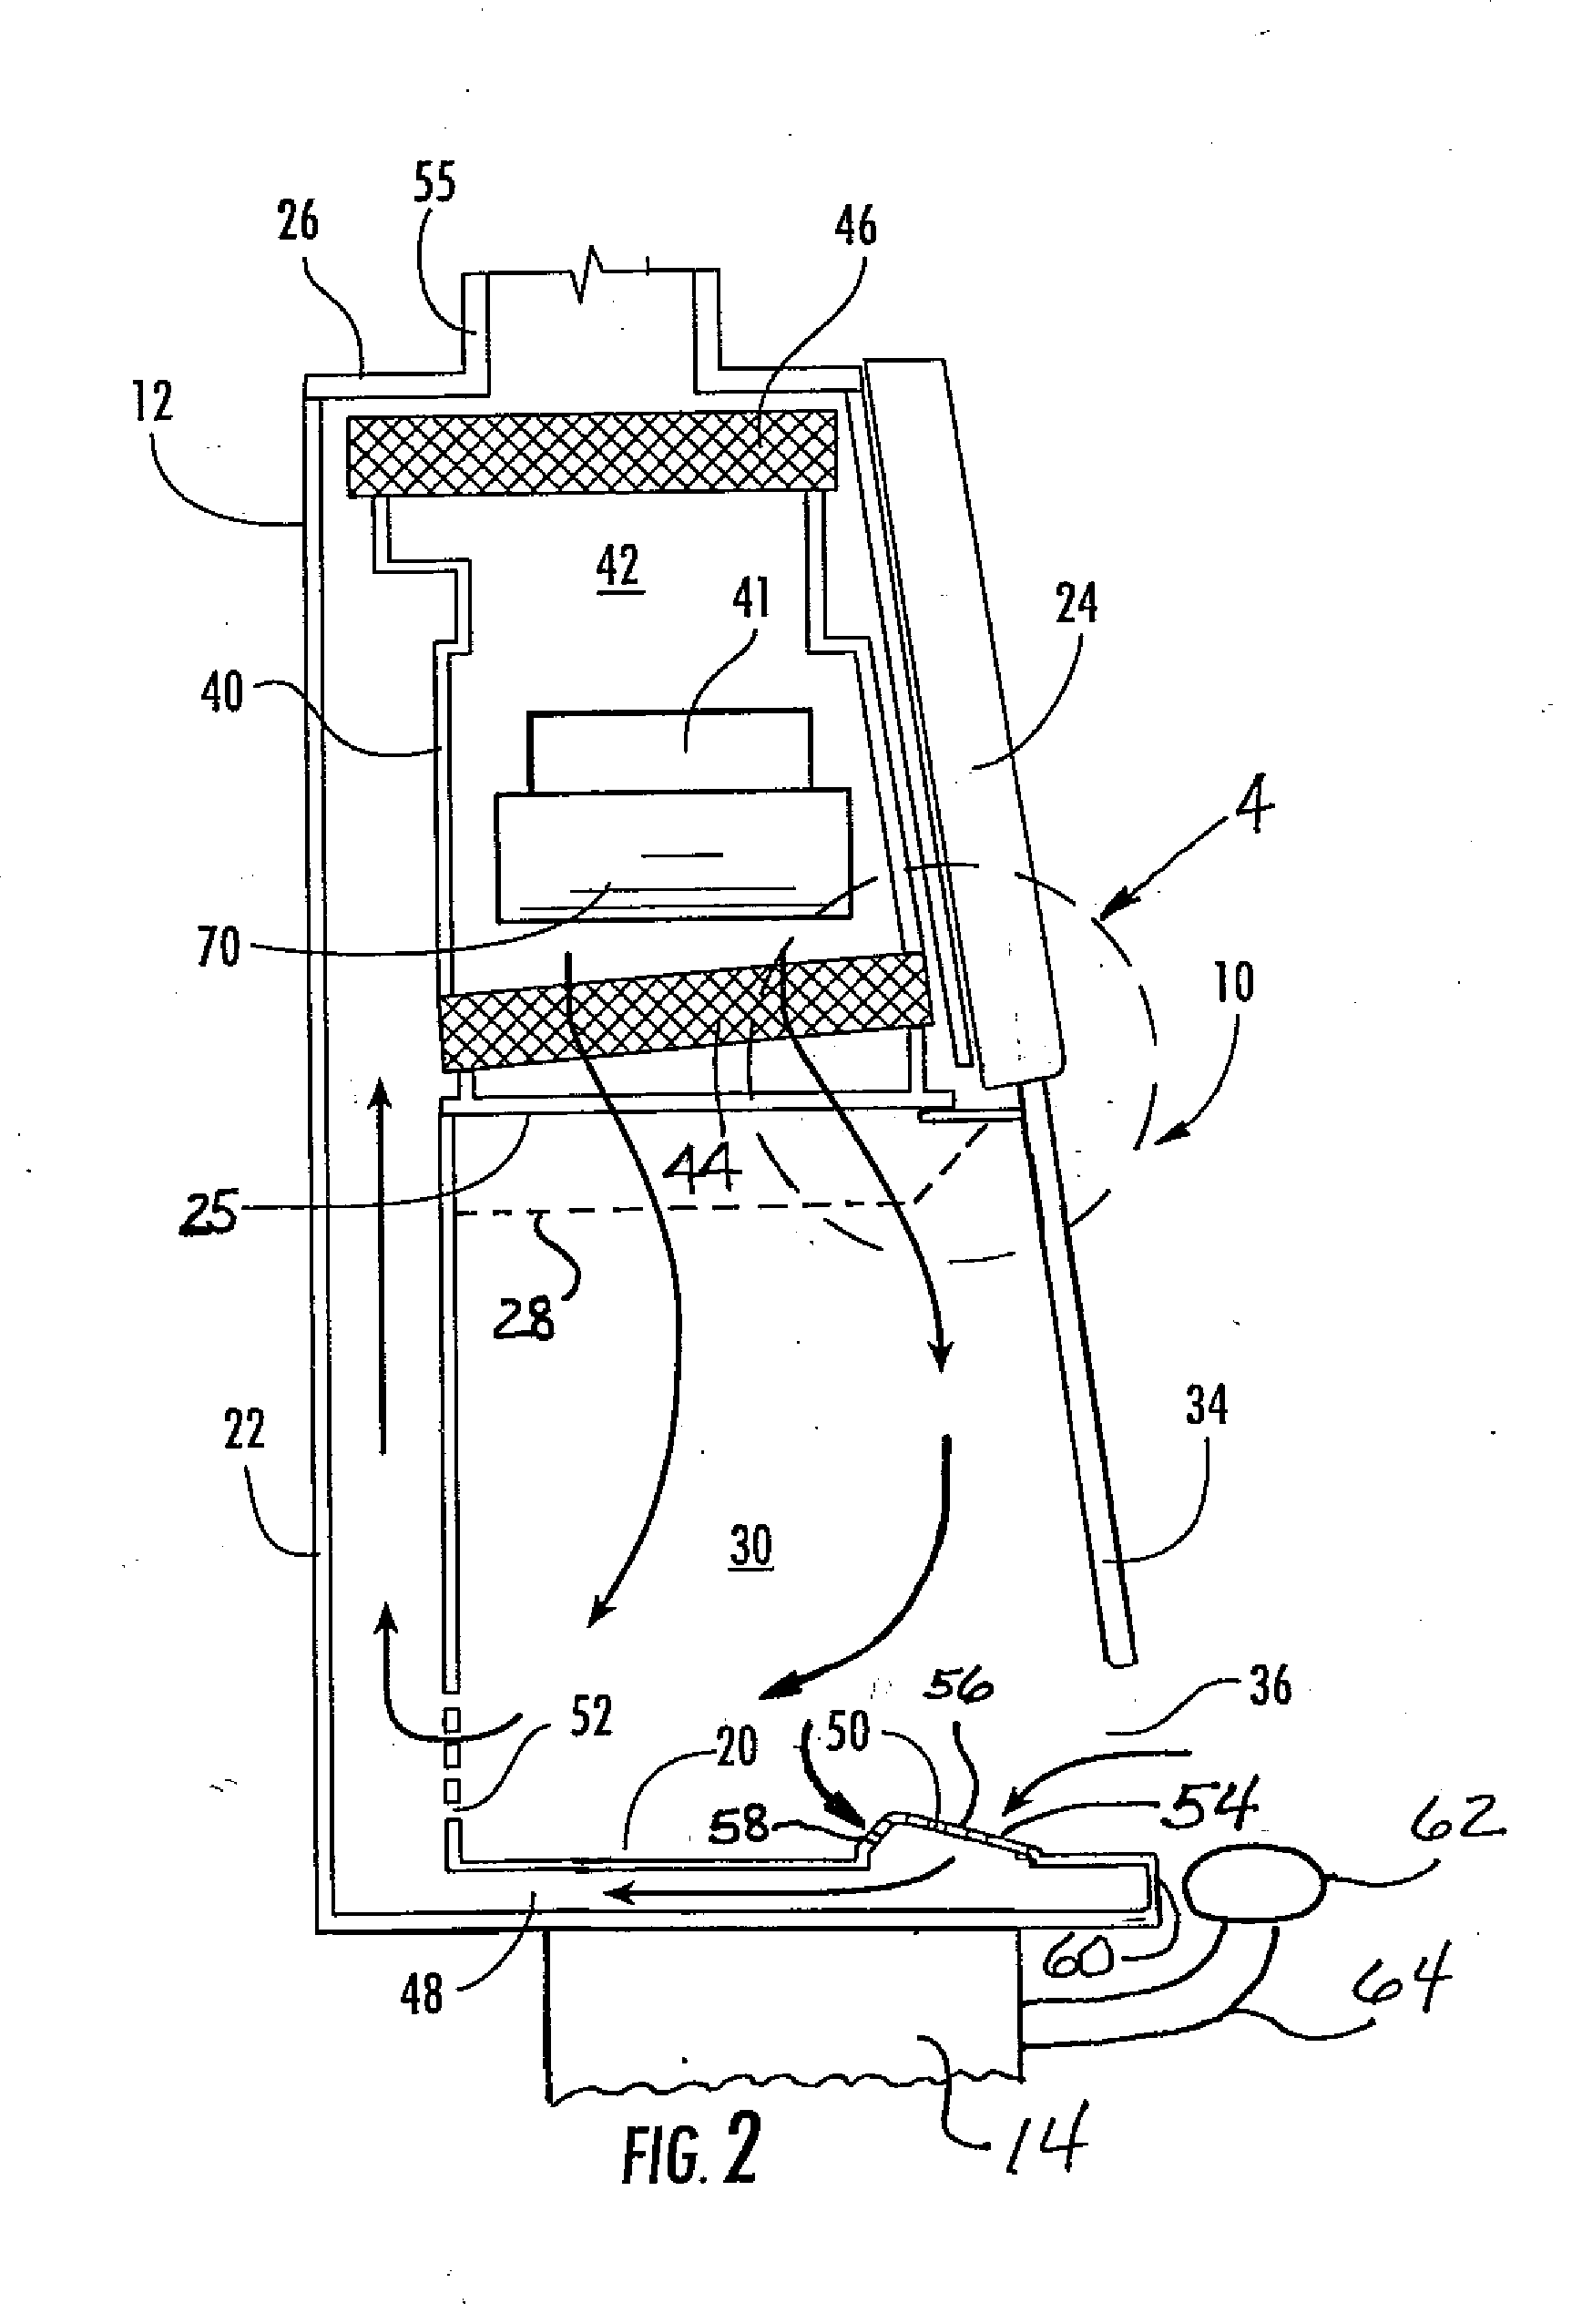 Apparatus for directing air flow in a biological safety cabinet